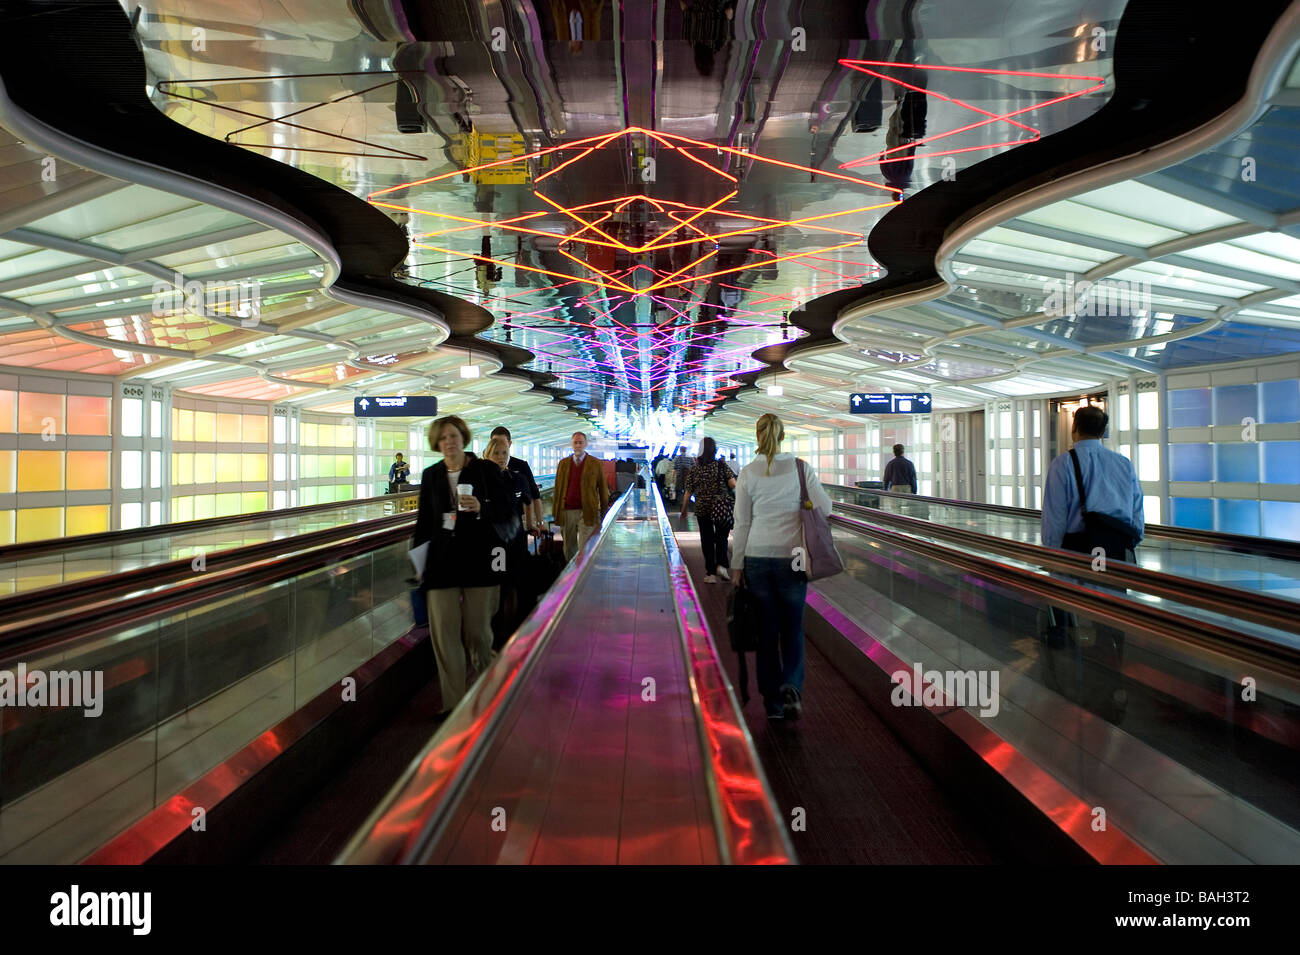 United States, Illinois, Chicago, O'Hare new international airport, pedestrians on the moving walkway Stock Photo